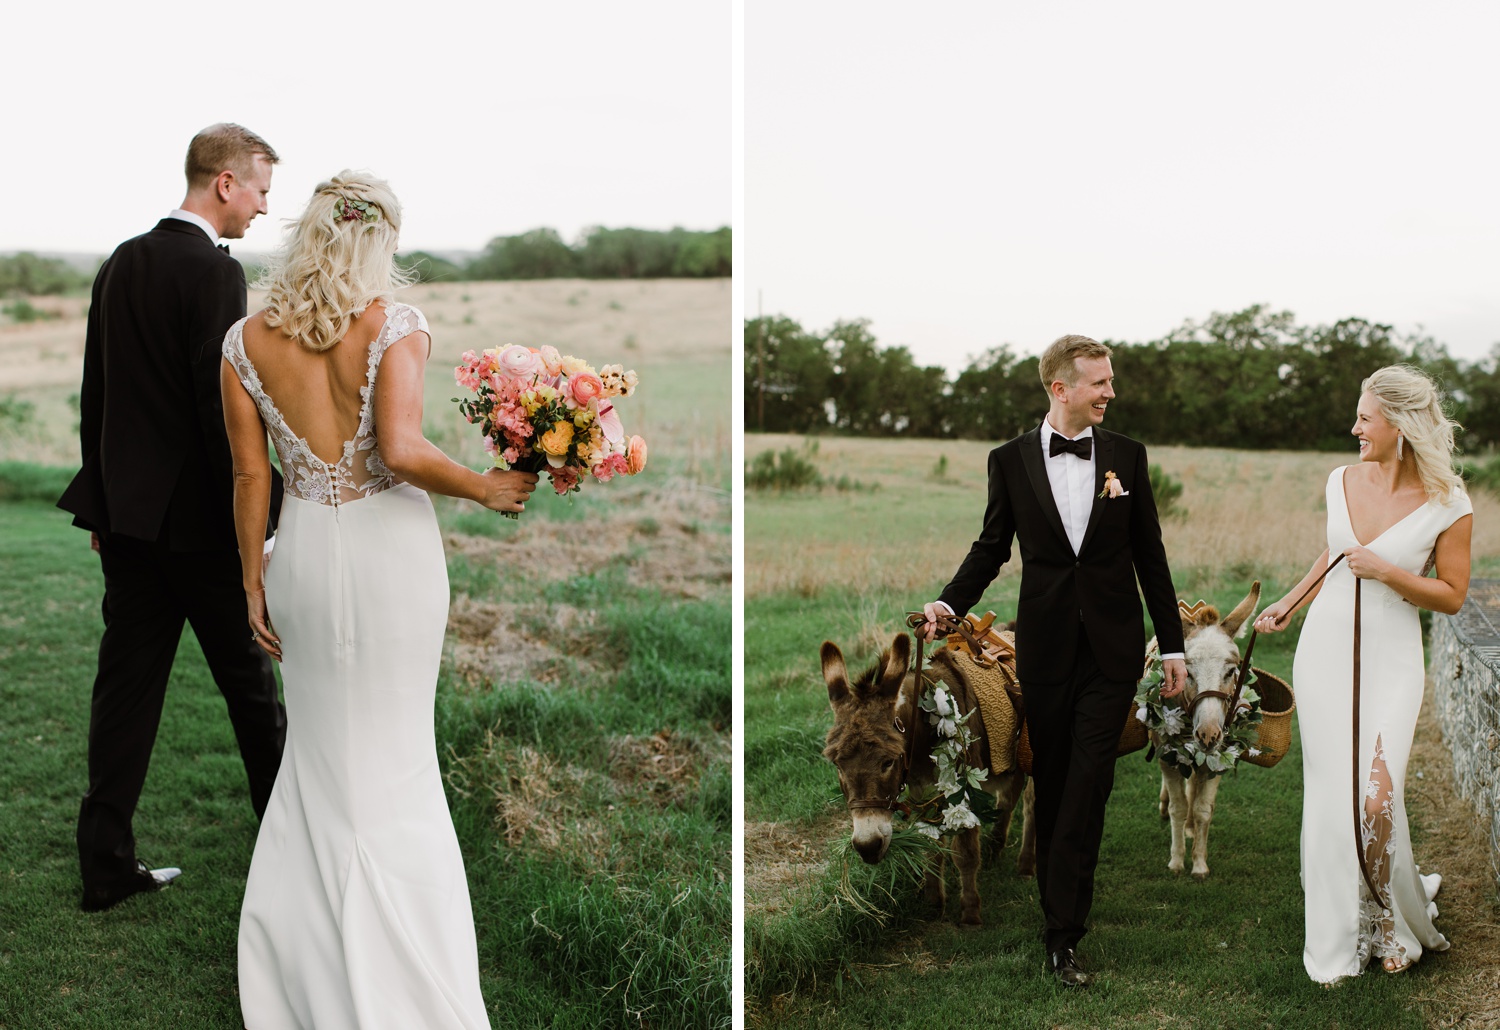 Beer burros at a Texas wedding with floral wreaths around their necks